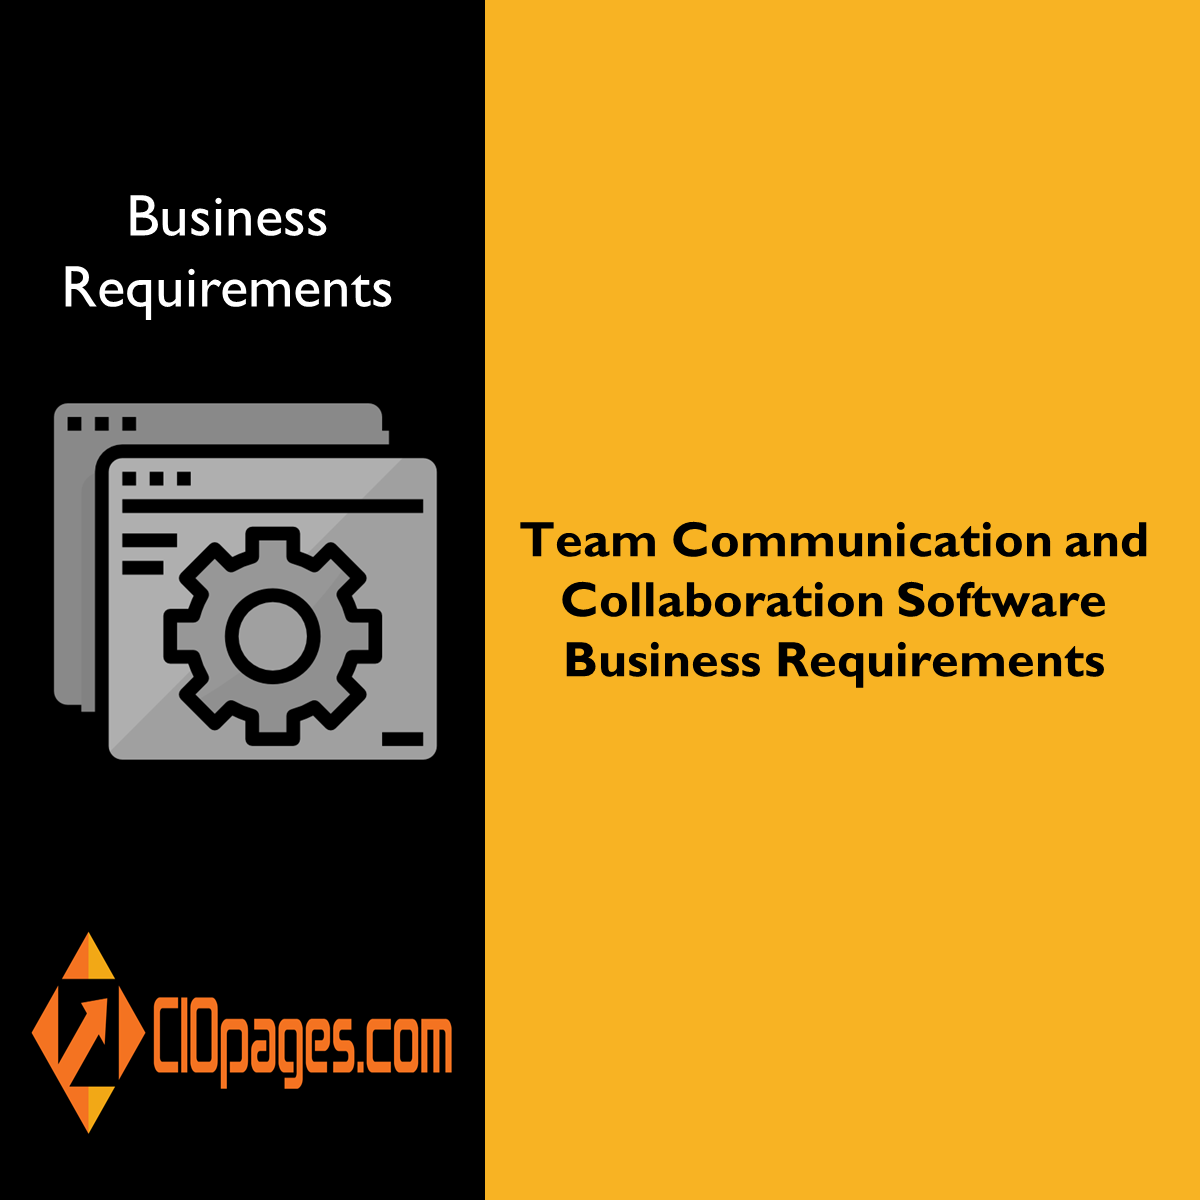 Team Communication and Collaboration Software Business Requirements